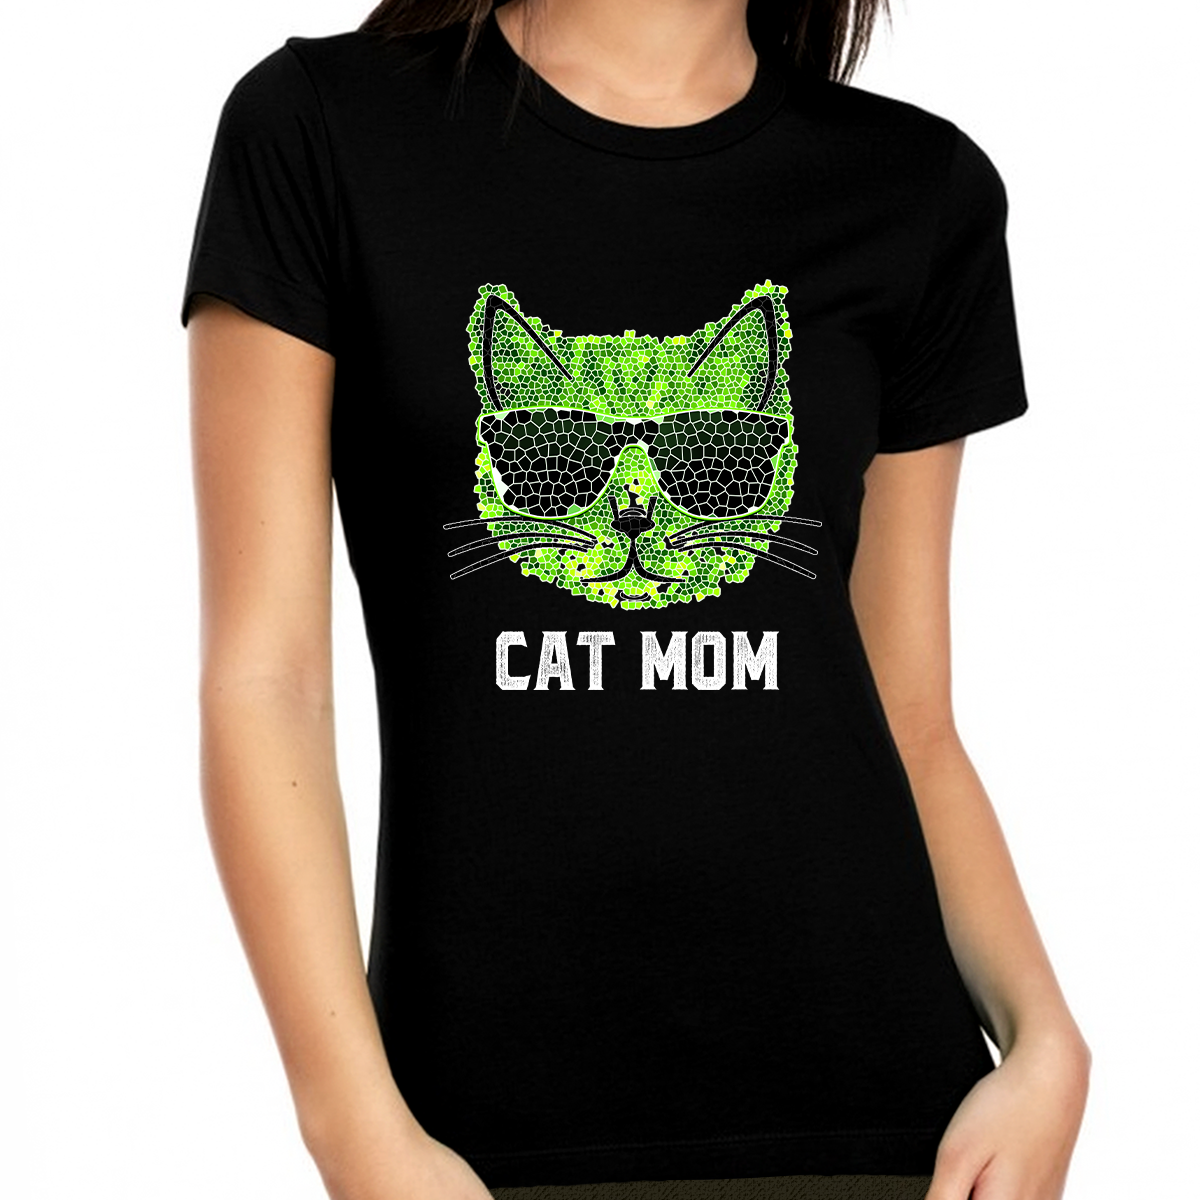 Cat Mom Shirt - Funky Cat Shirt - Cat Shirts for Women Cat Mom Gifts for Women Cat Lover Shirts - Fire Fit Designs